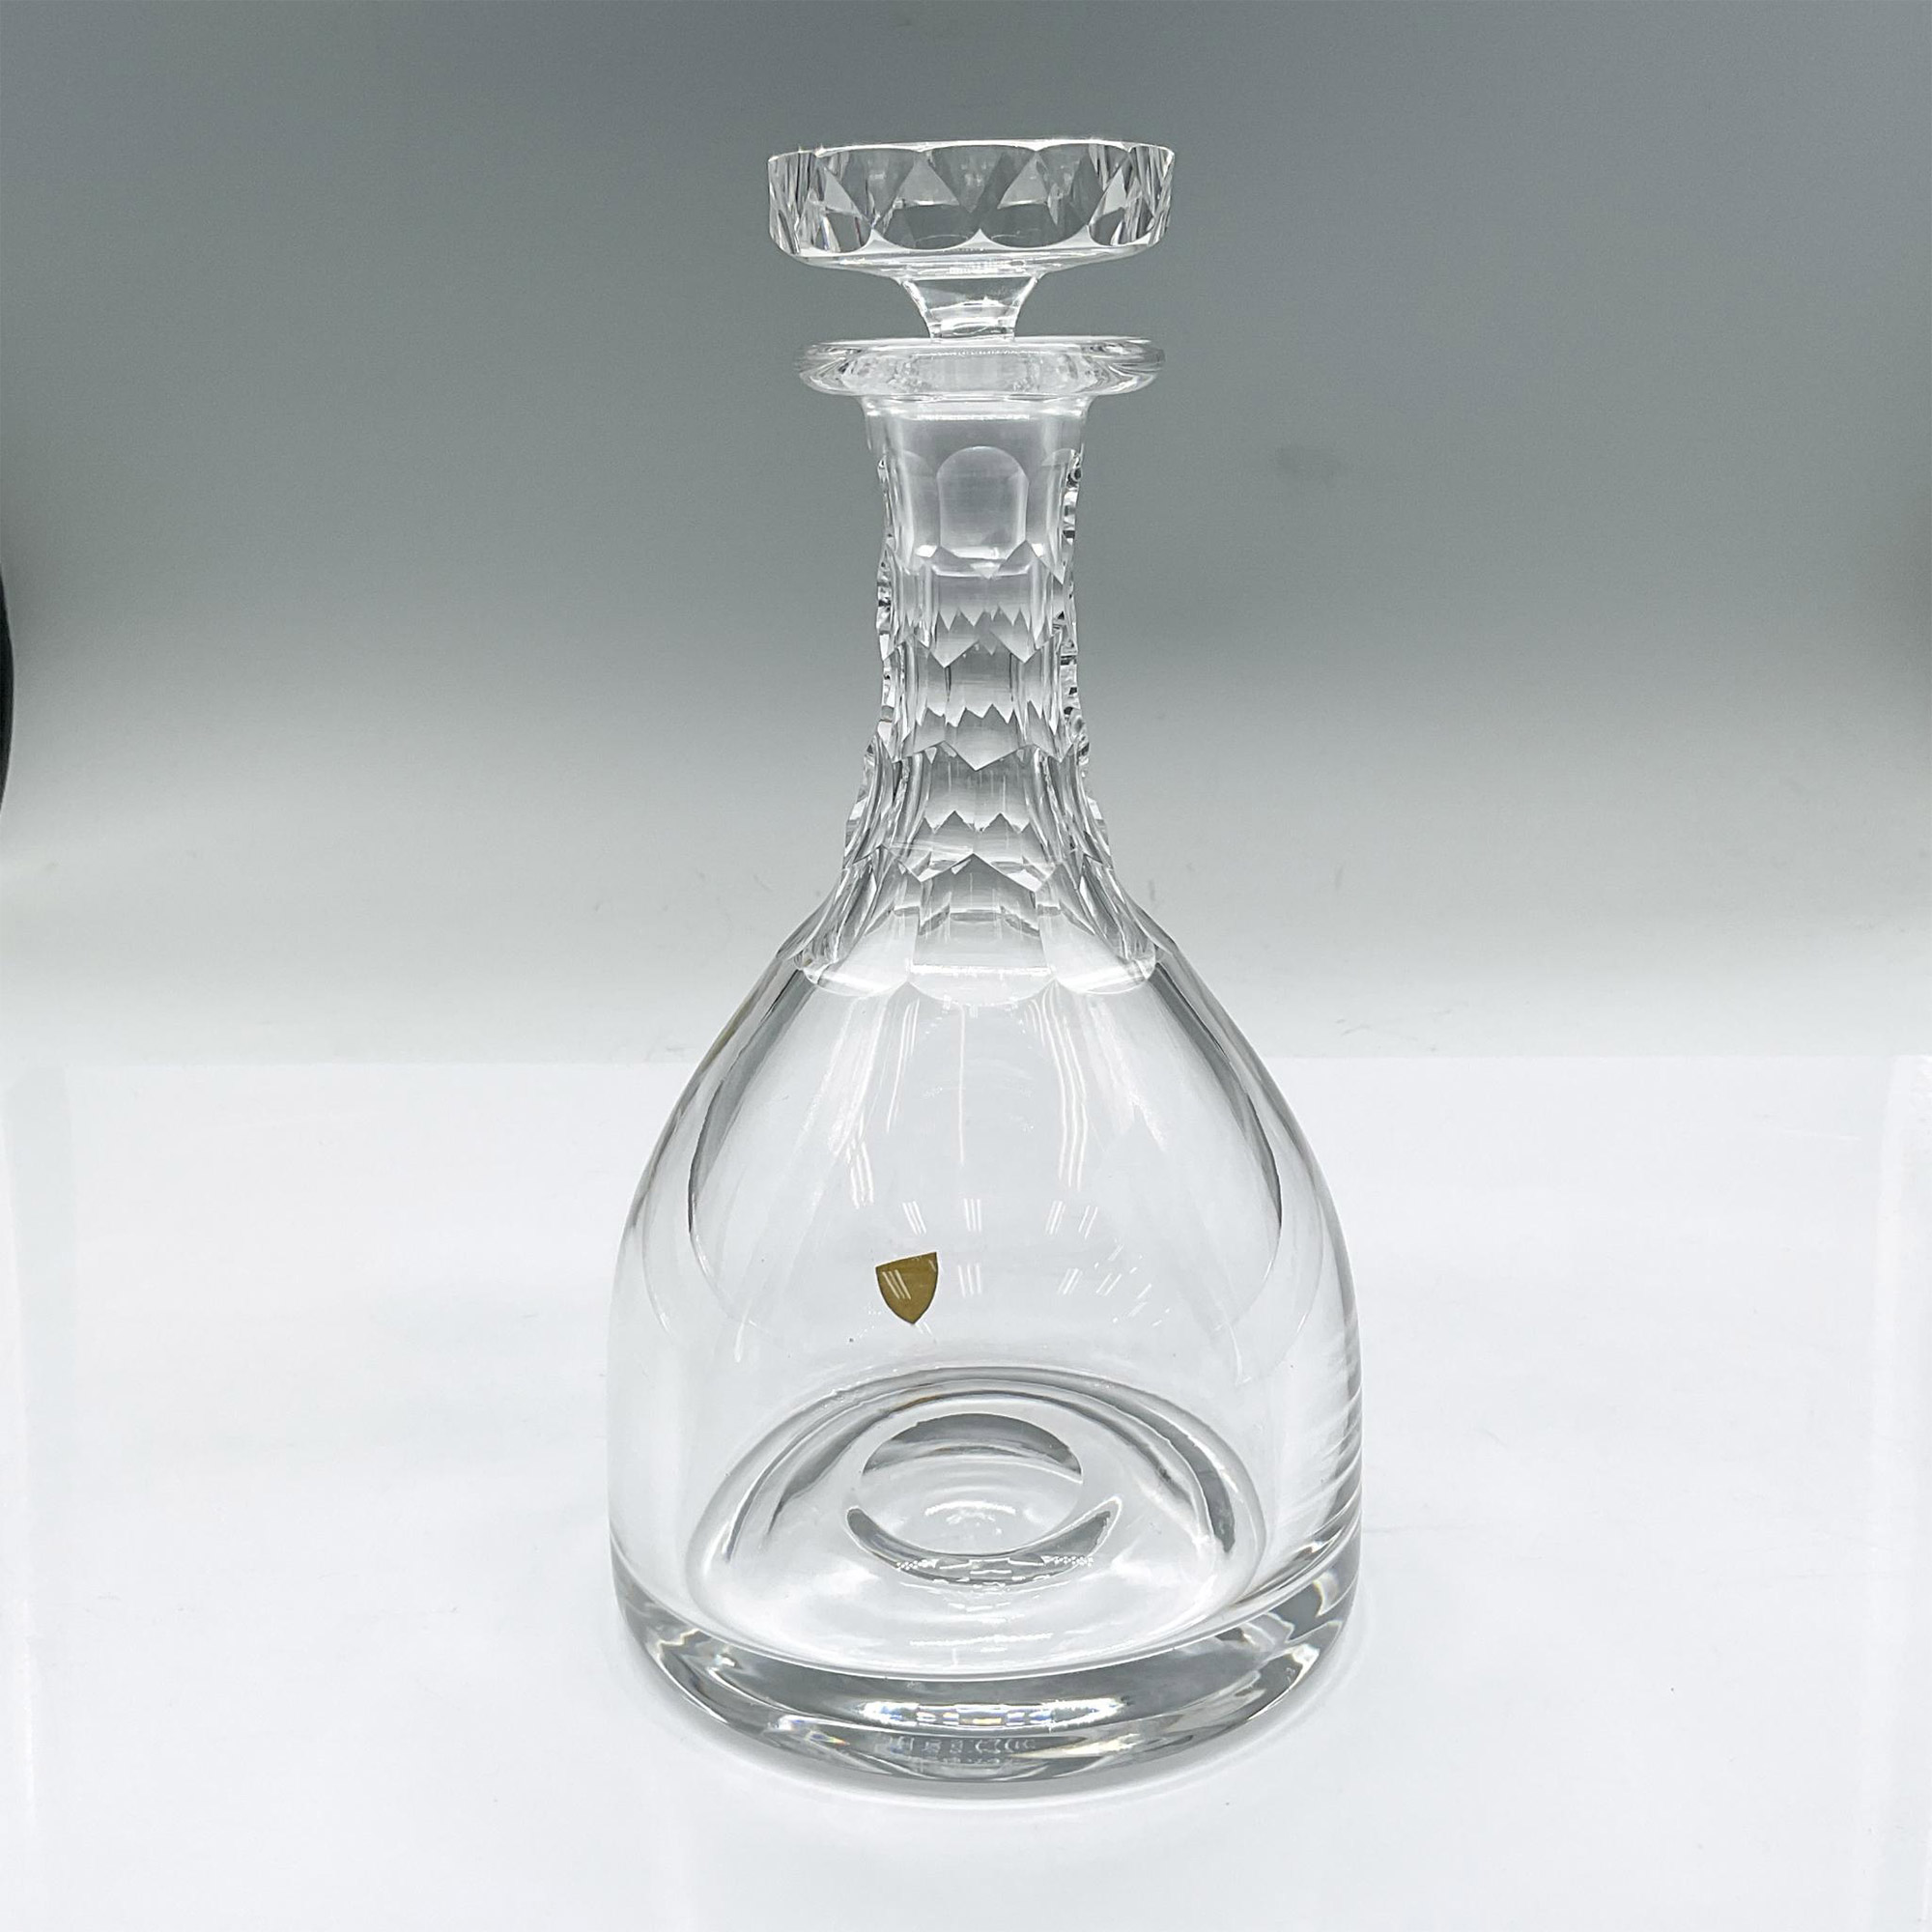 Orrefors Crystal Decanter, Carina - Image 2 of 4